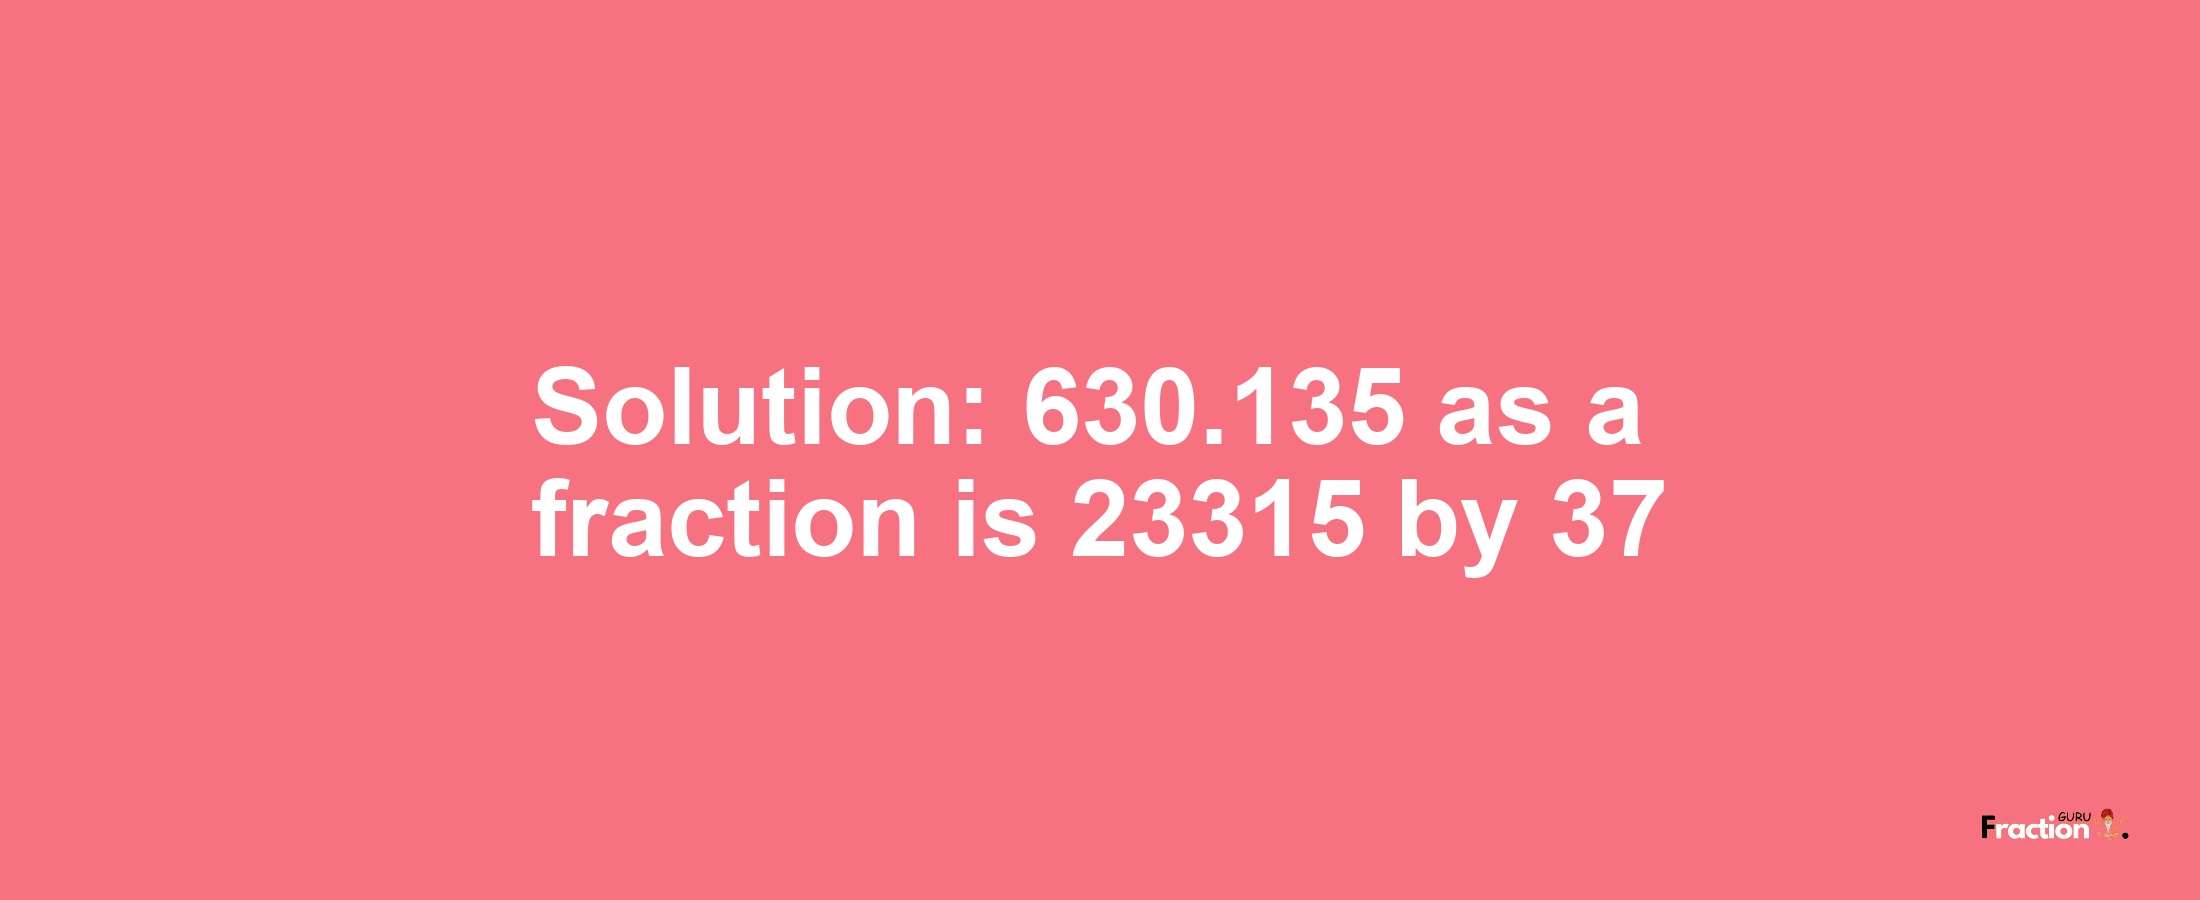 Solution:630.135 as a fraction is 23315/37